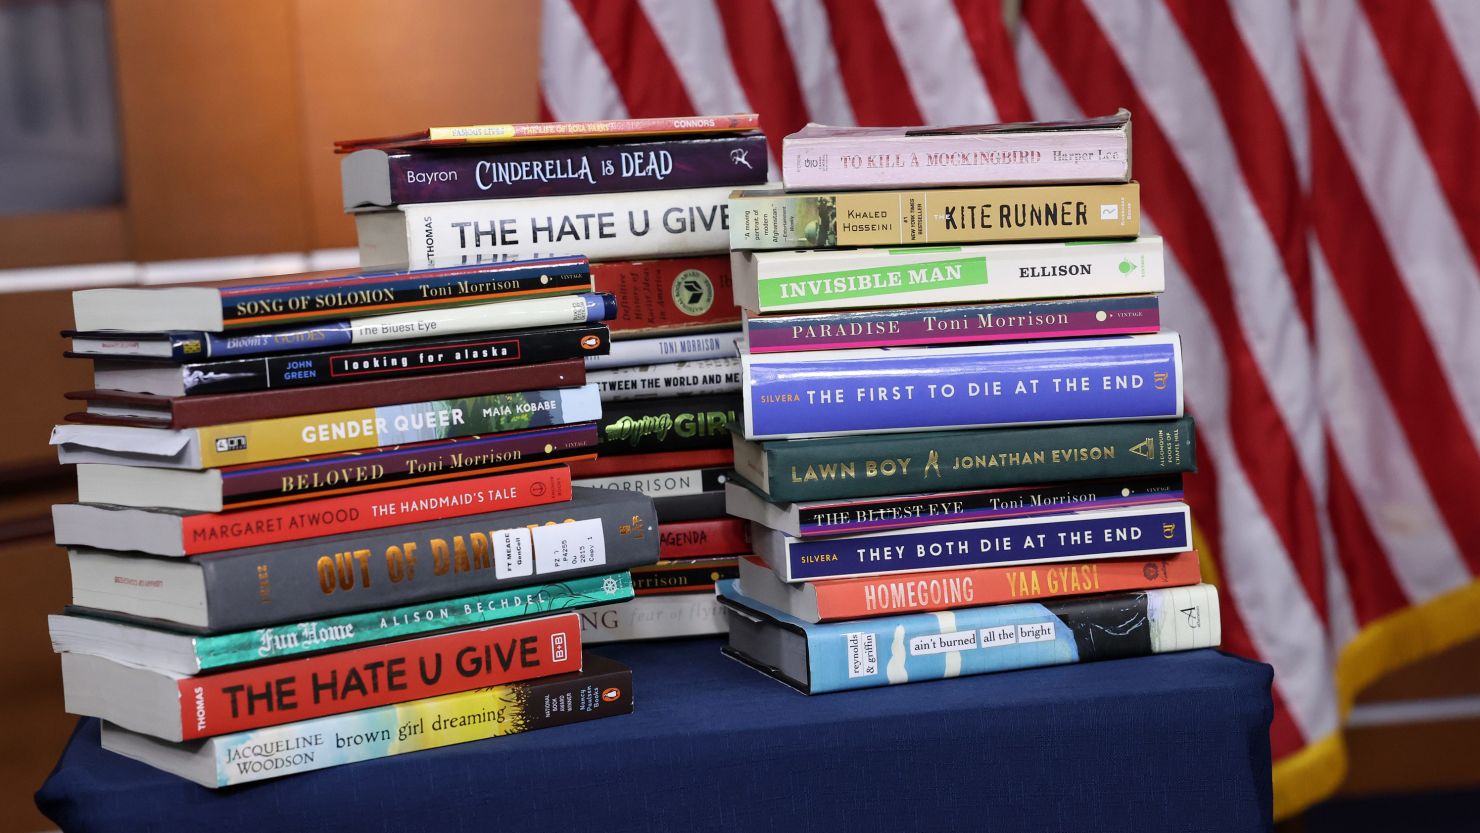 WASHINGTON, DC - MARCH 24: Copies of banned books from various states and school systems from around the county are seen during a press conference by U.S. House Democratic Leader Hakeem Jeffries (D-NY) at the U.S. Capitol on March 24, 2023 in Washington, DC. Jeffries spoke out against the recently passed Parents Bill of Rights Act and the banning and censorship of books in schools. (Photo by Kevin Dietsch/Getty Images)